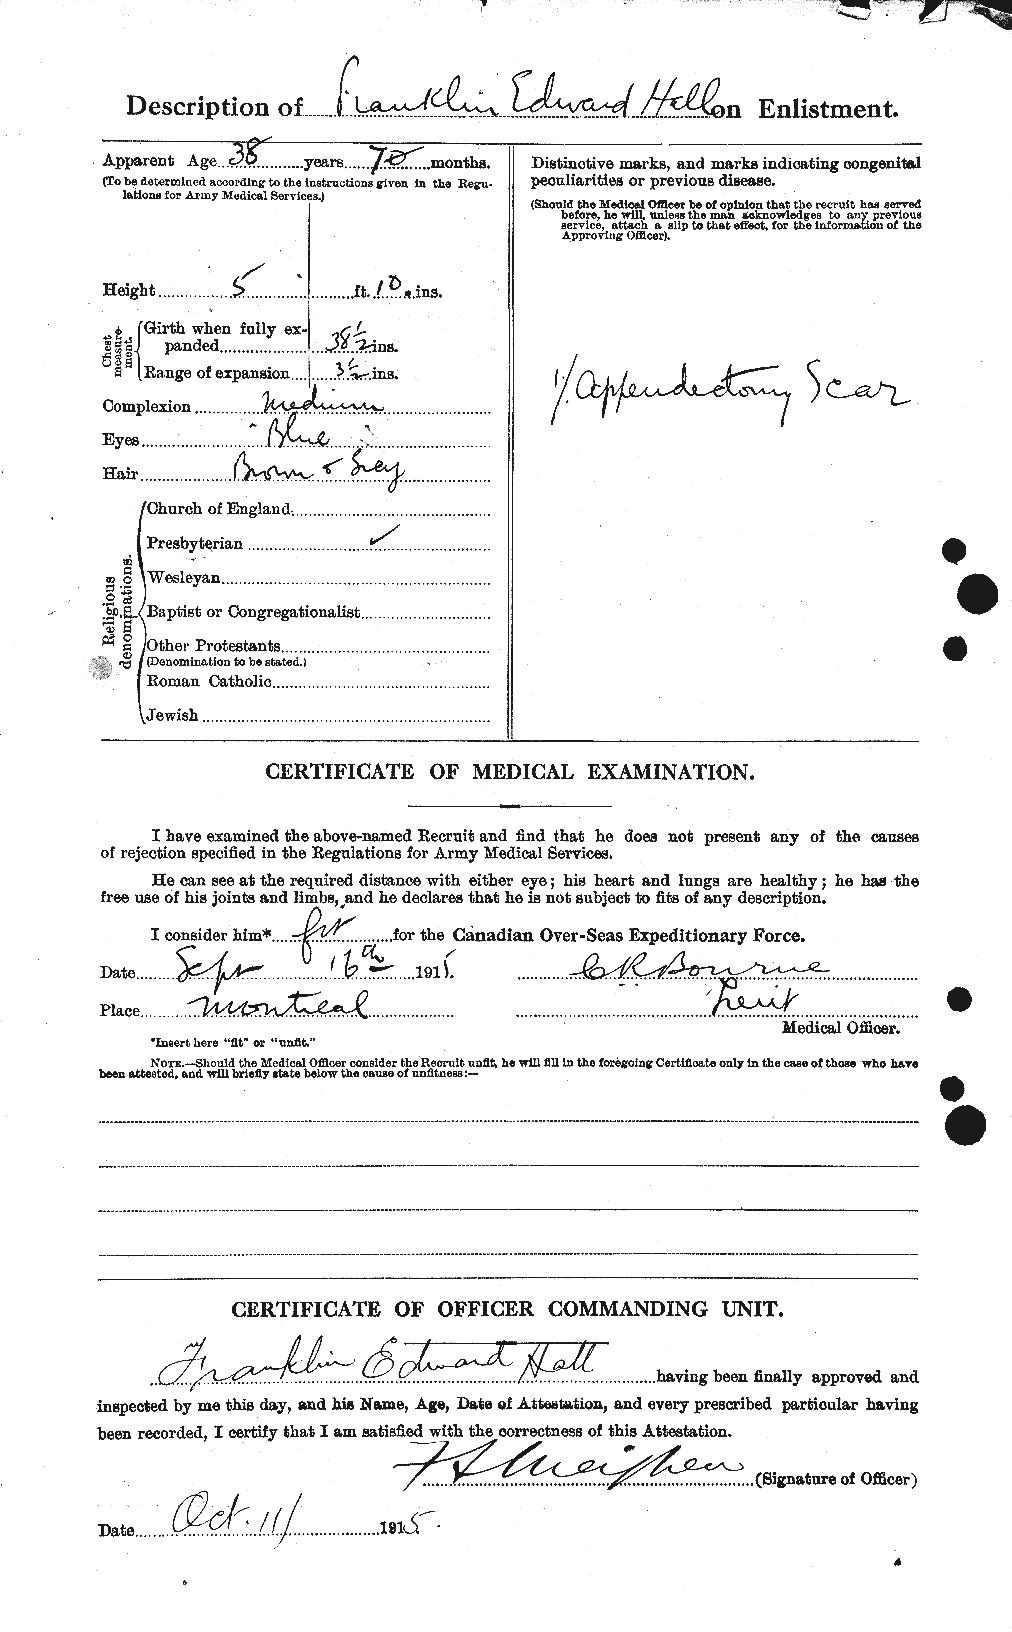 Personnel Records of the First World War - CEF 372796b